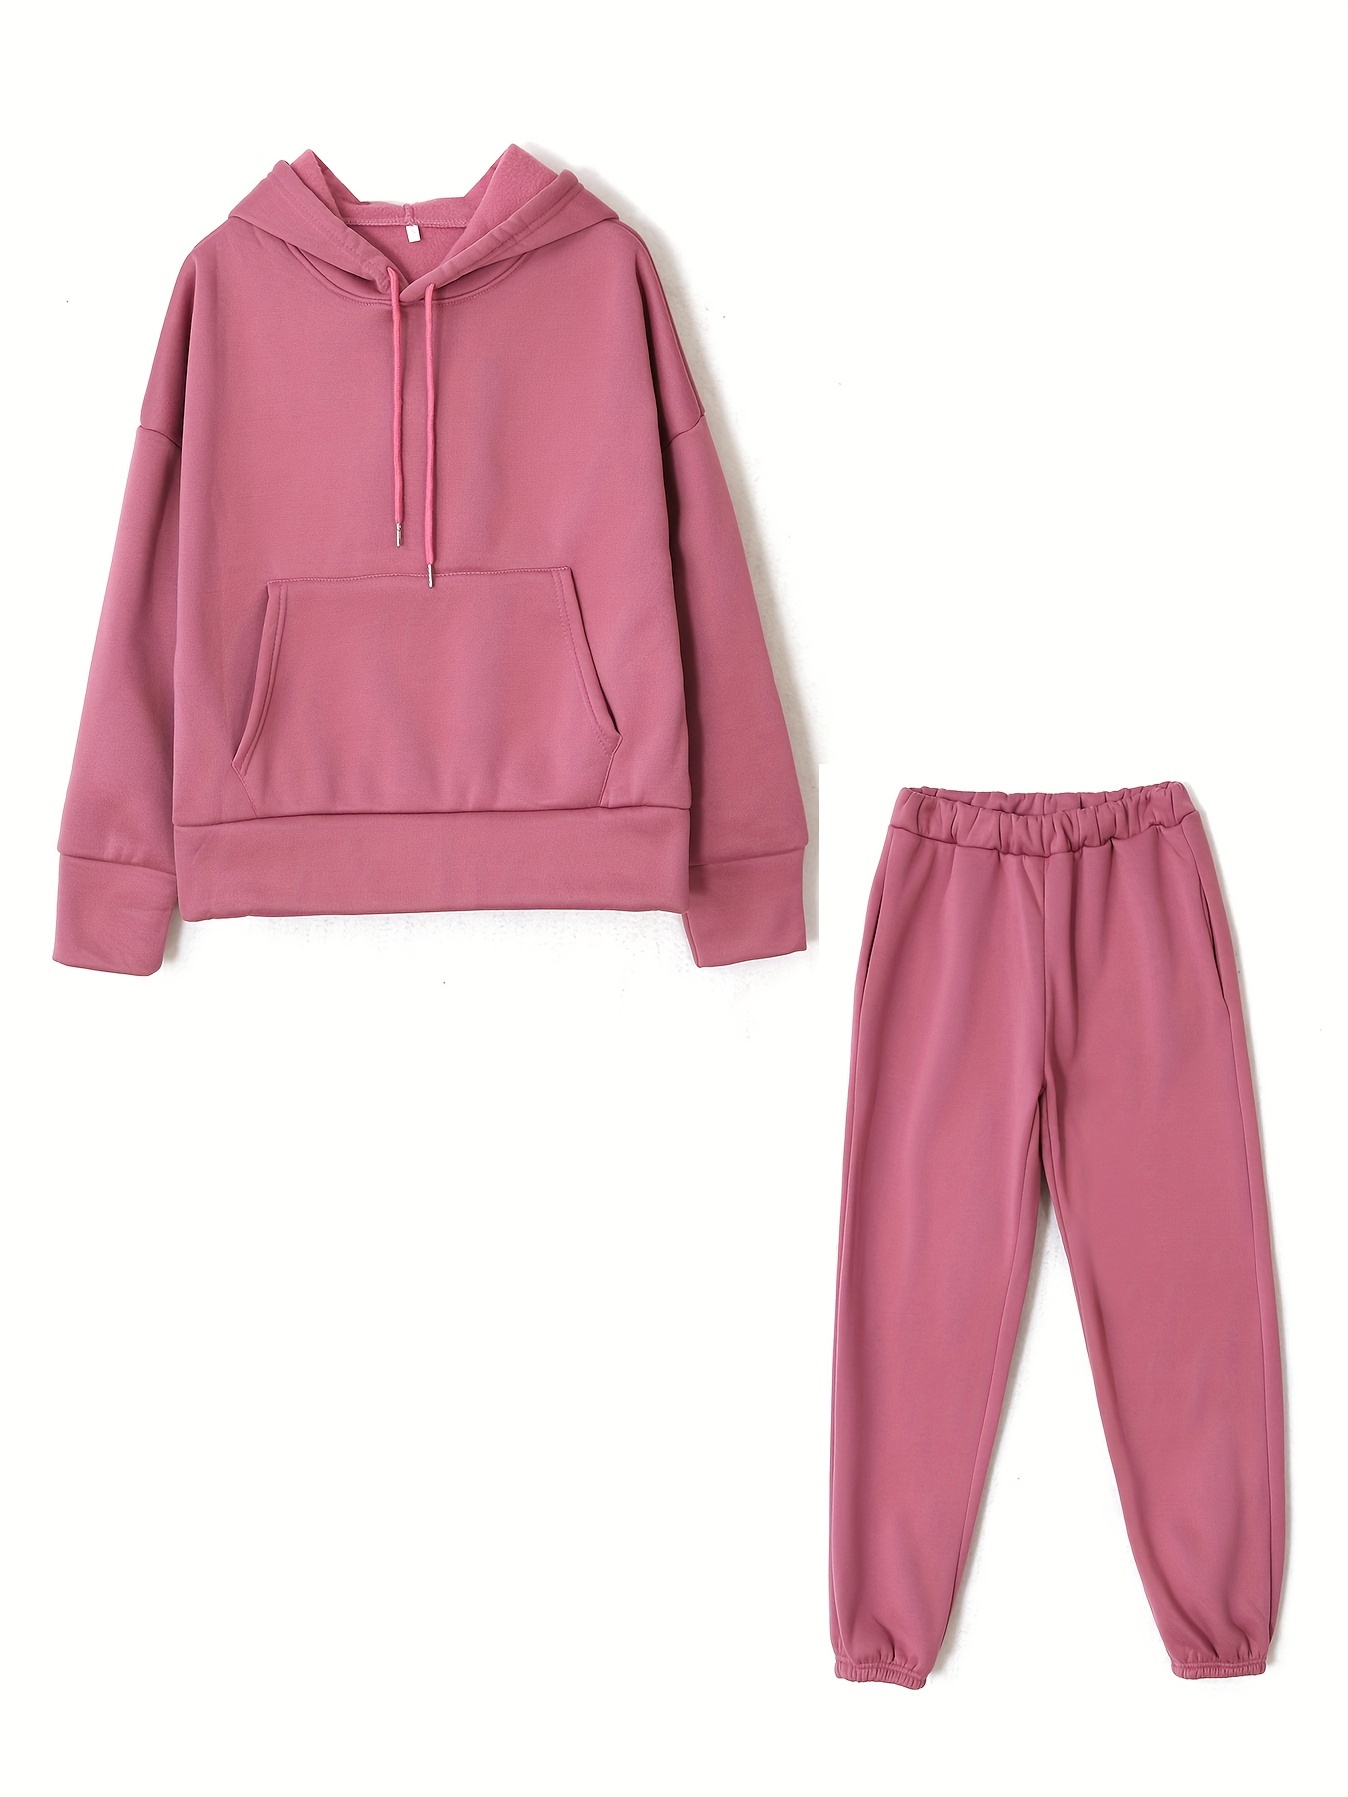 Sporty Solid Pocket Hoodies 2 Piece Pant Sets F2870  Cute sweatpants outfit,  Clothes, Clothes for women